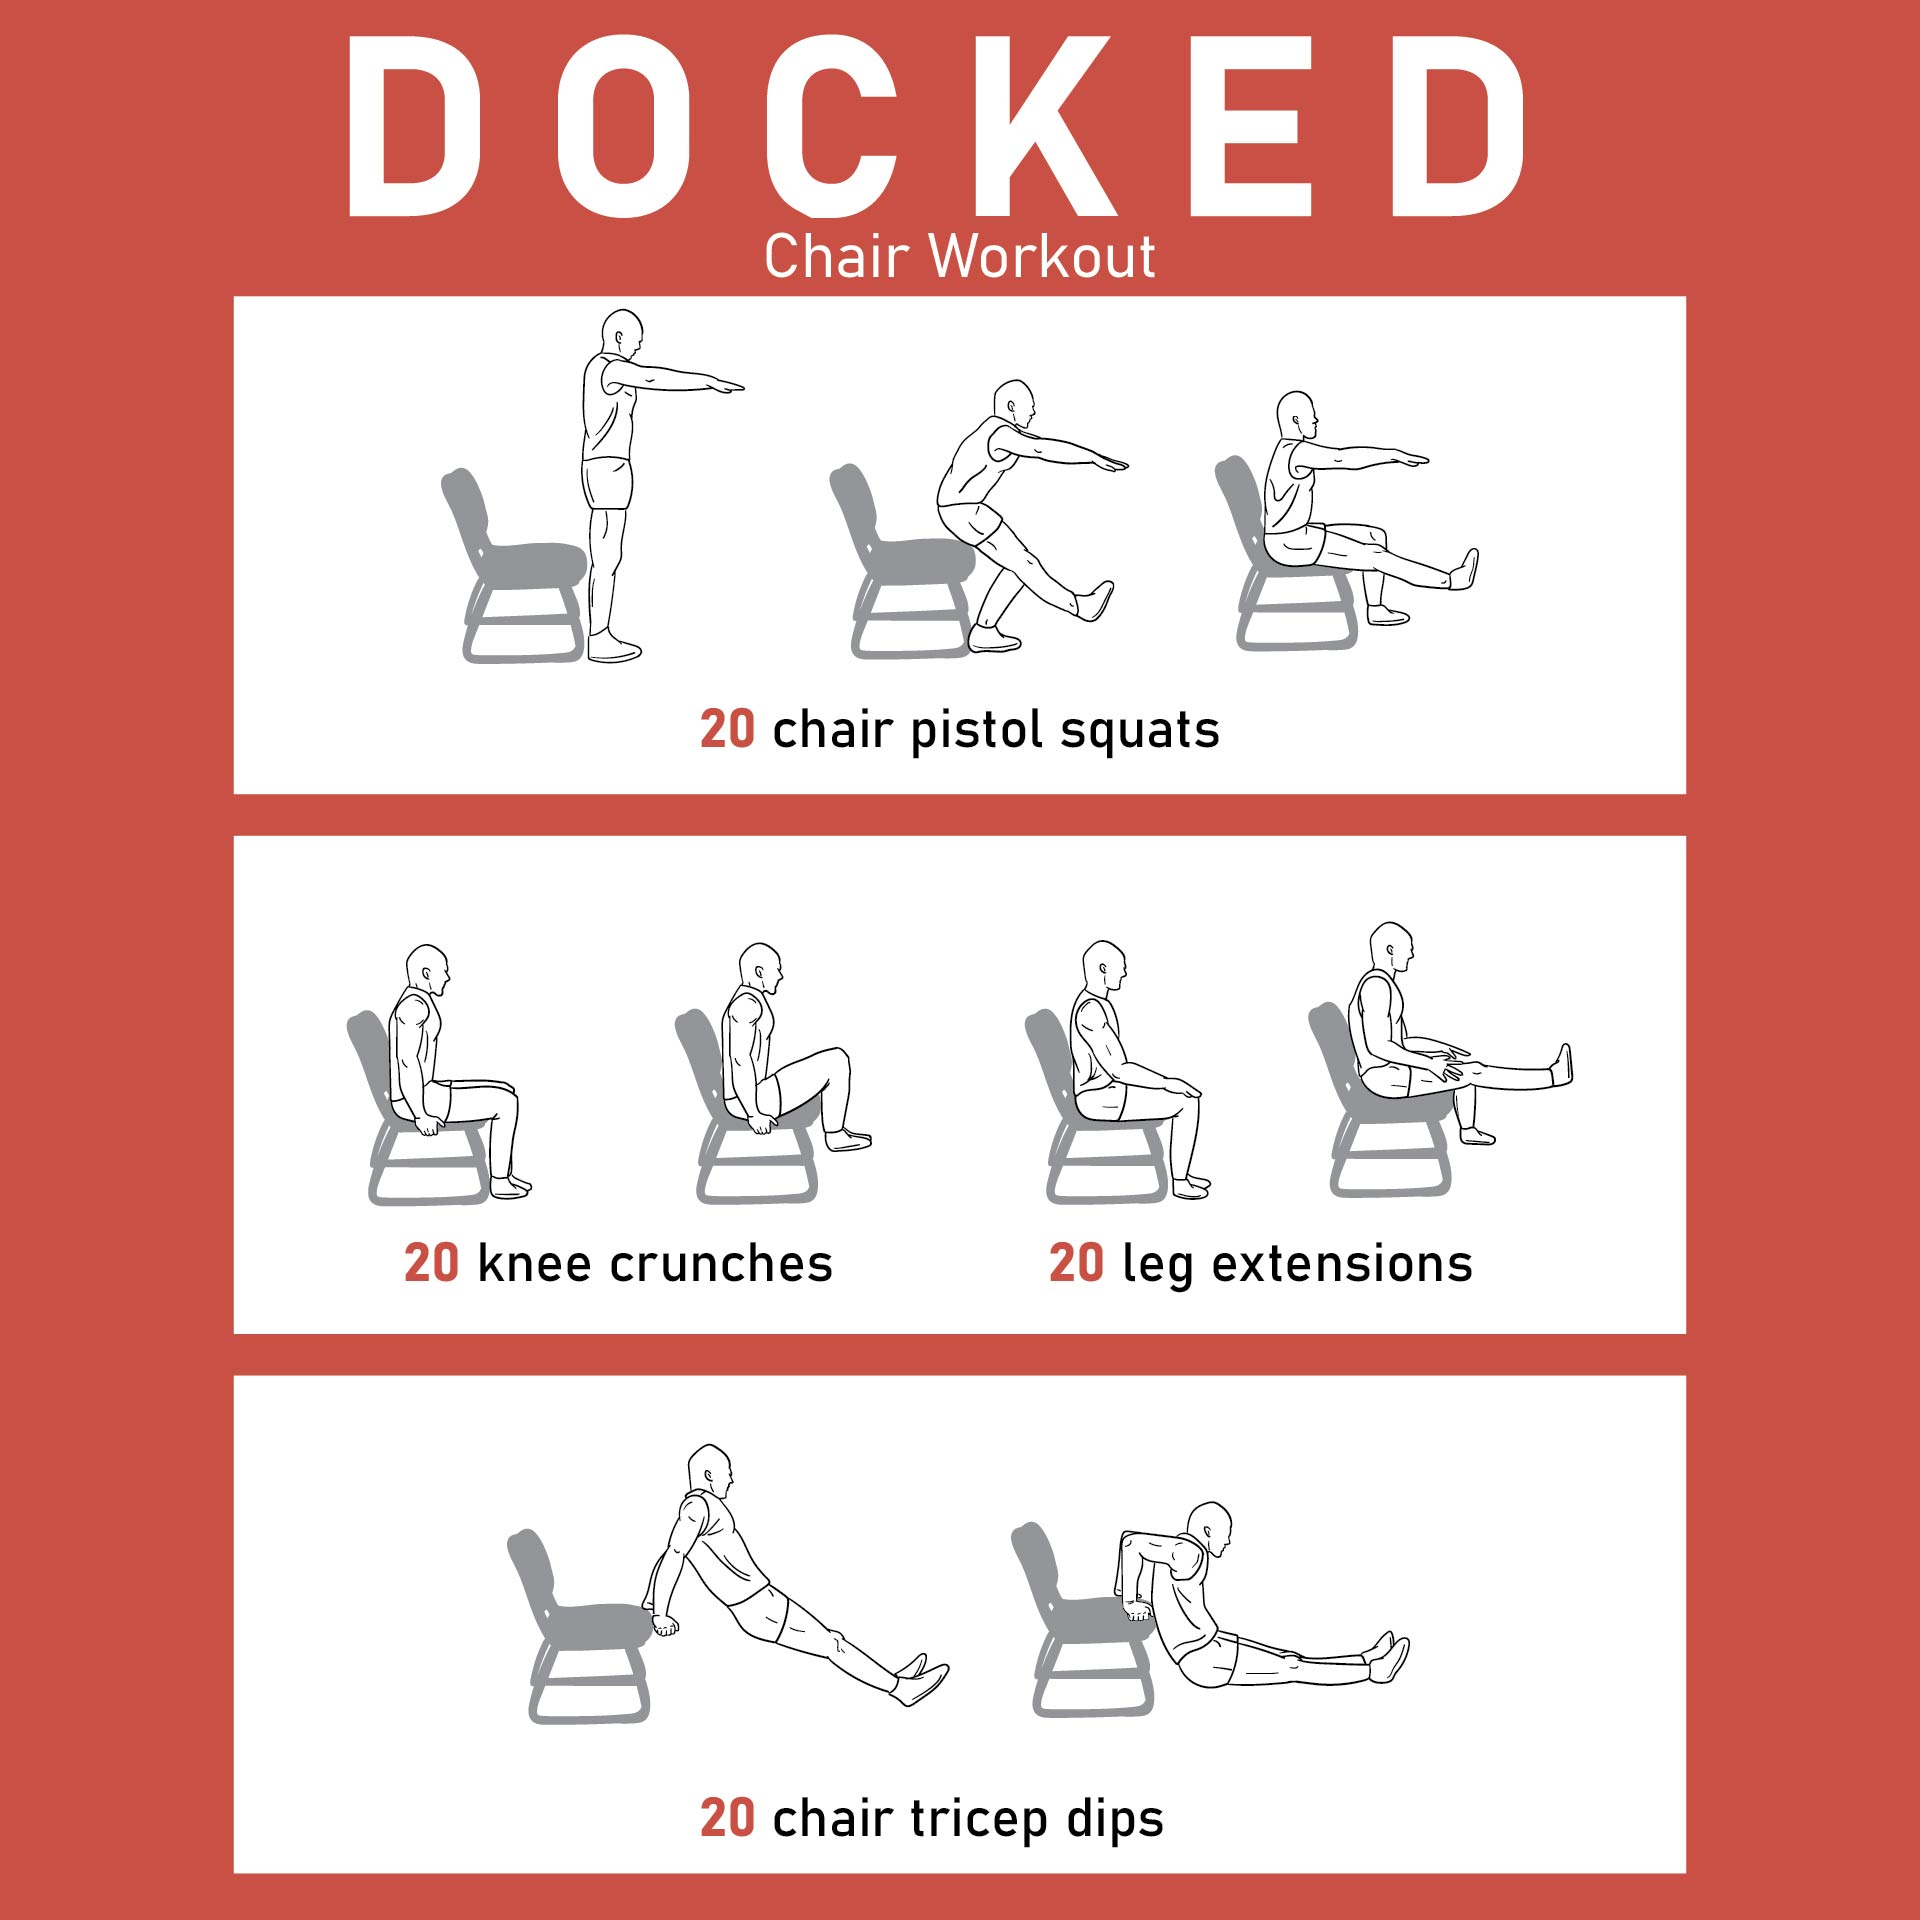 Chair Workout – illustrated exercise plan created at WorkoutLabs.com •  Click for a printable P…